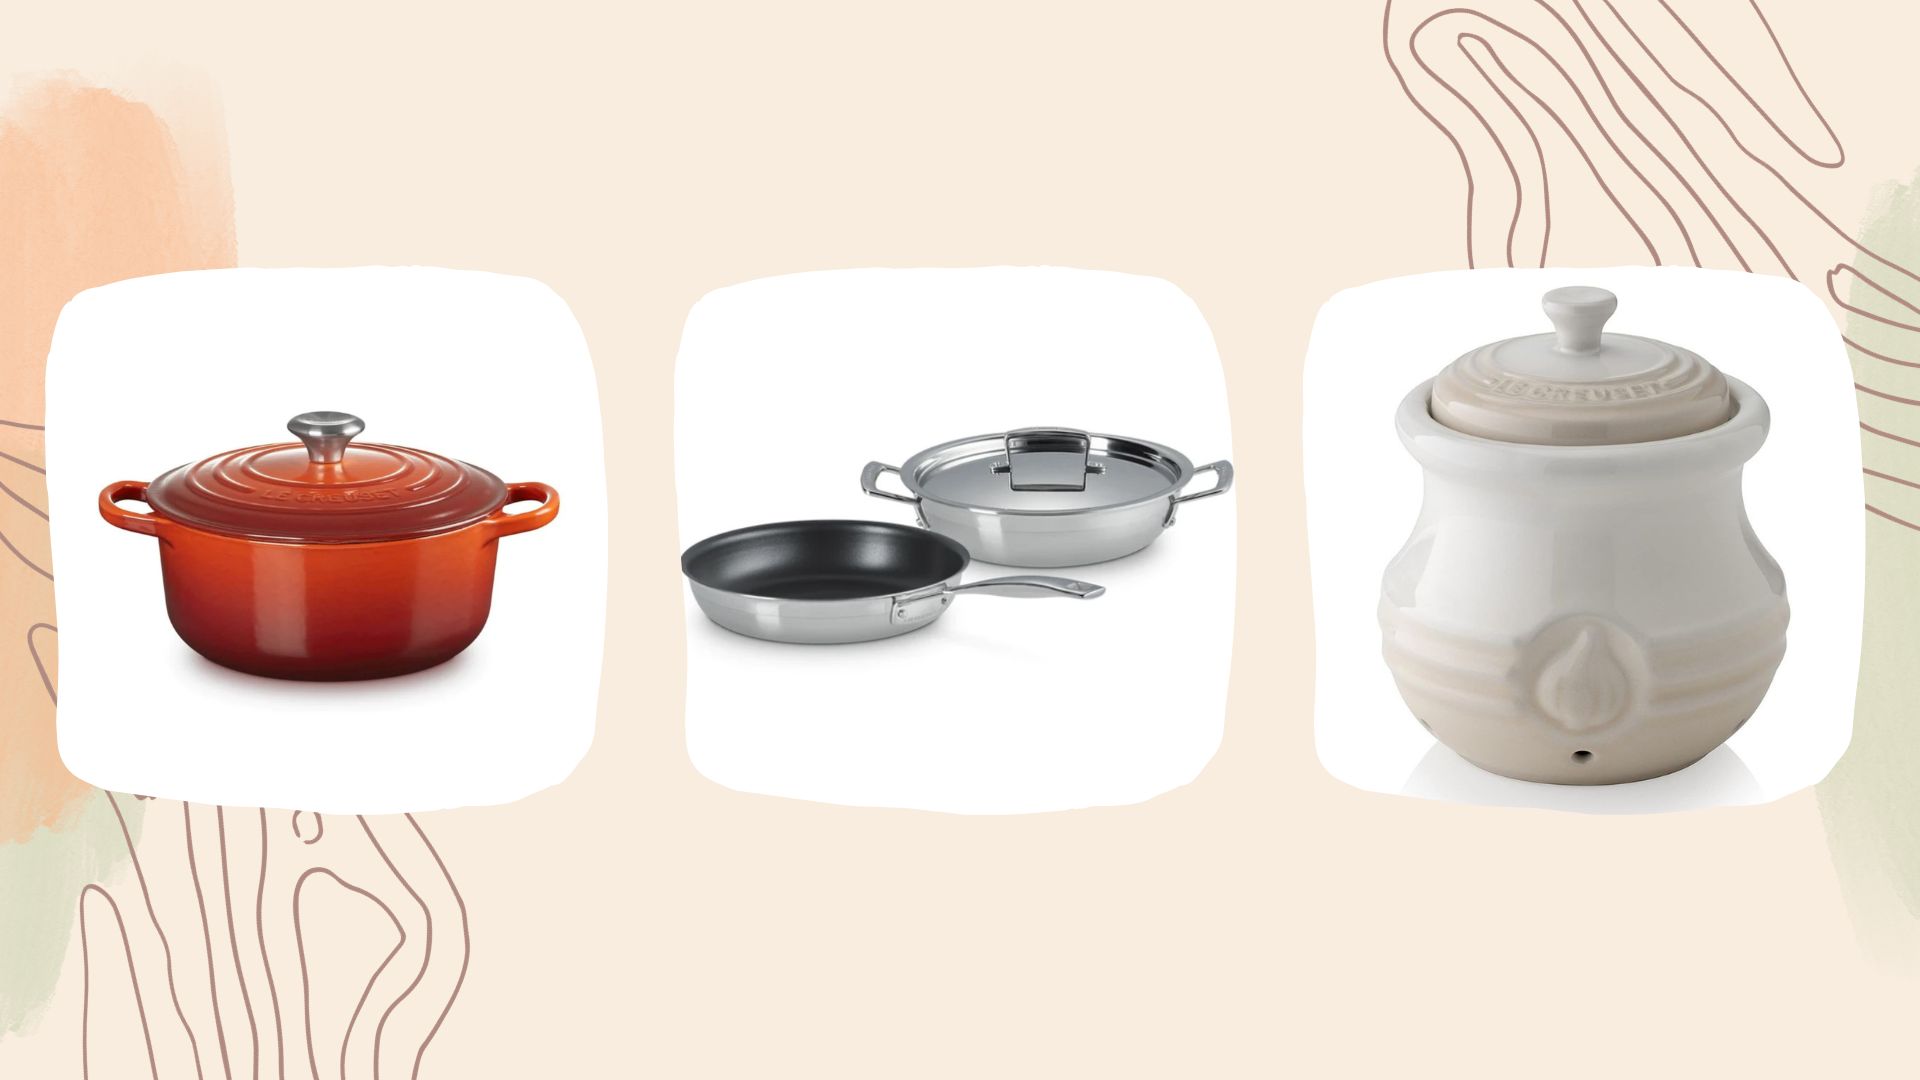 Le Creuset sale: This fancy Dutch oven is up to 40% off